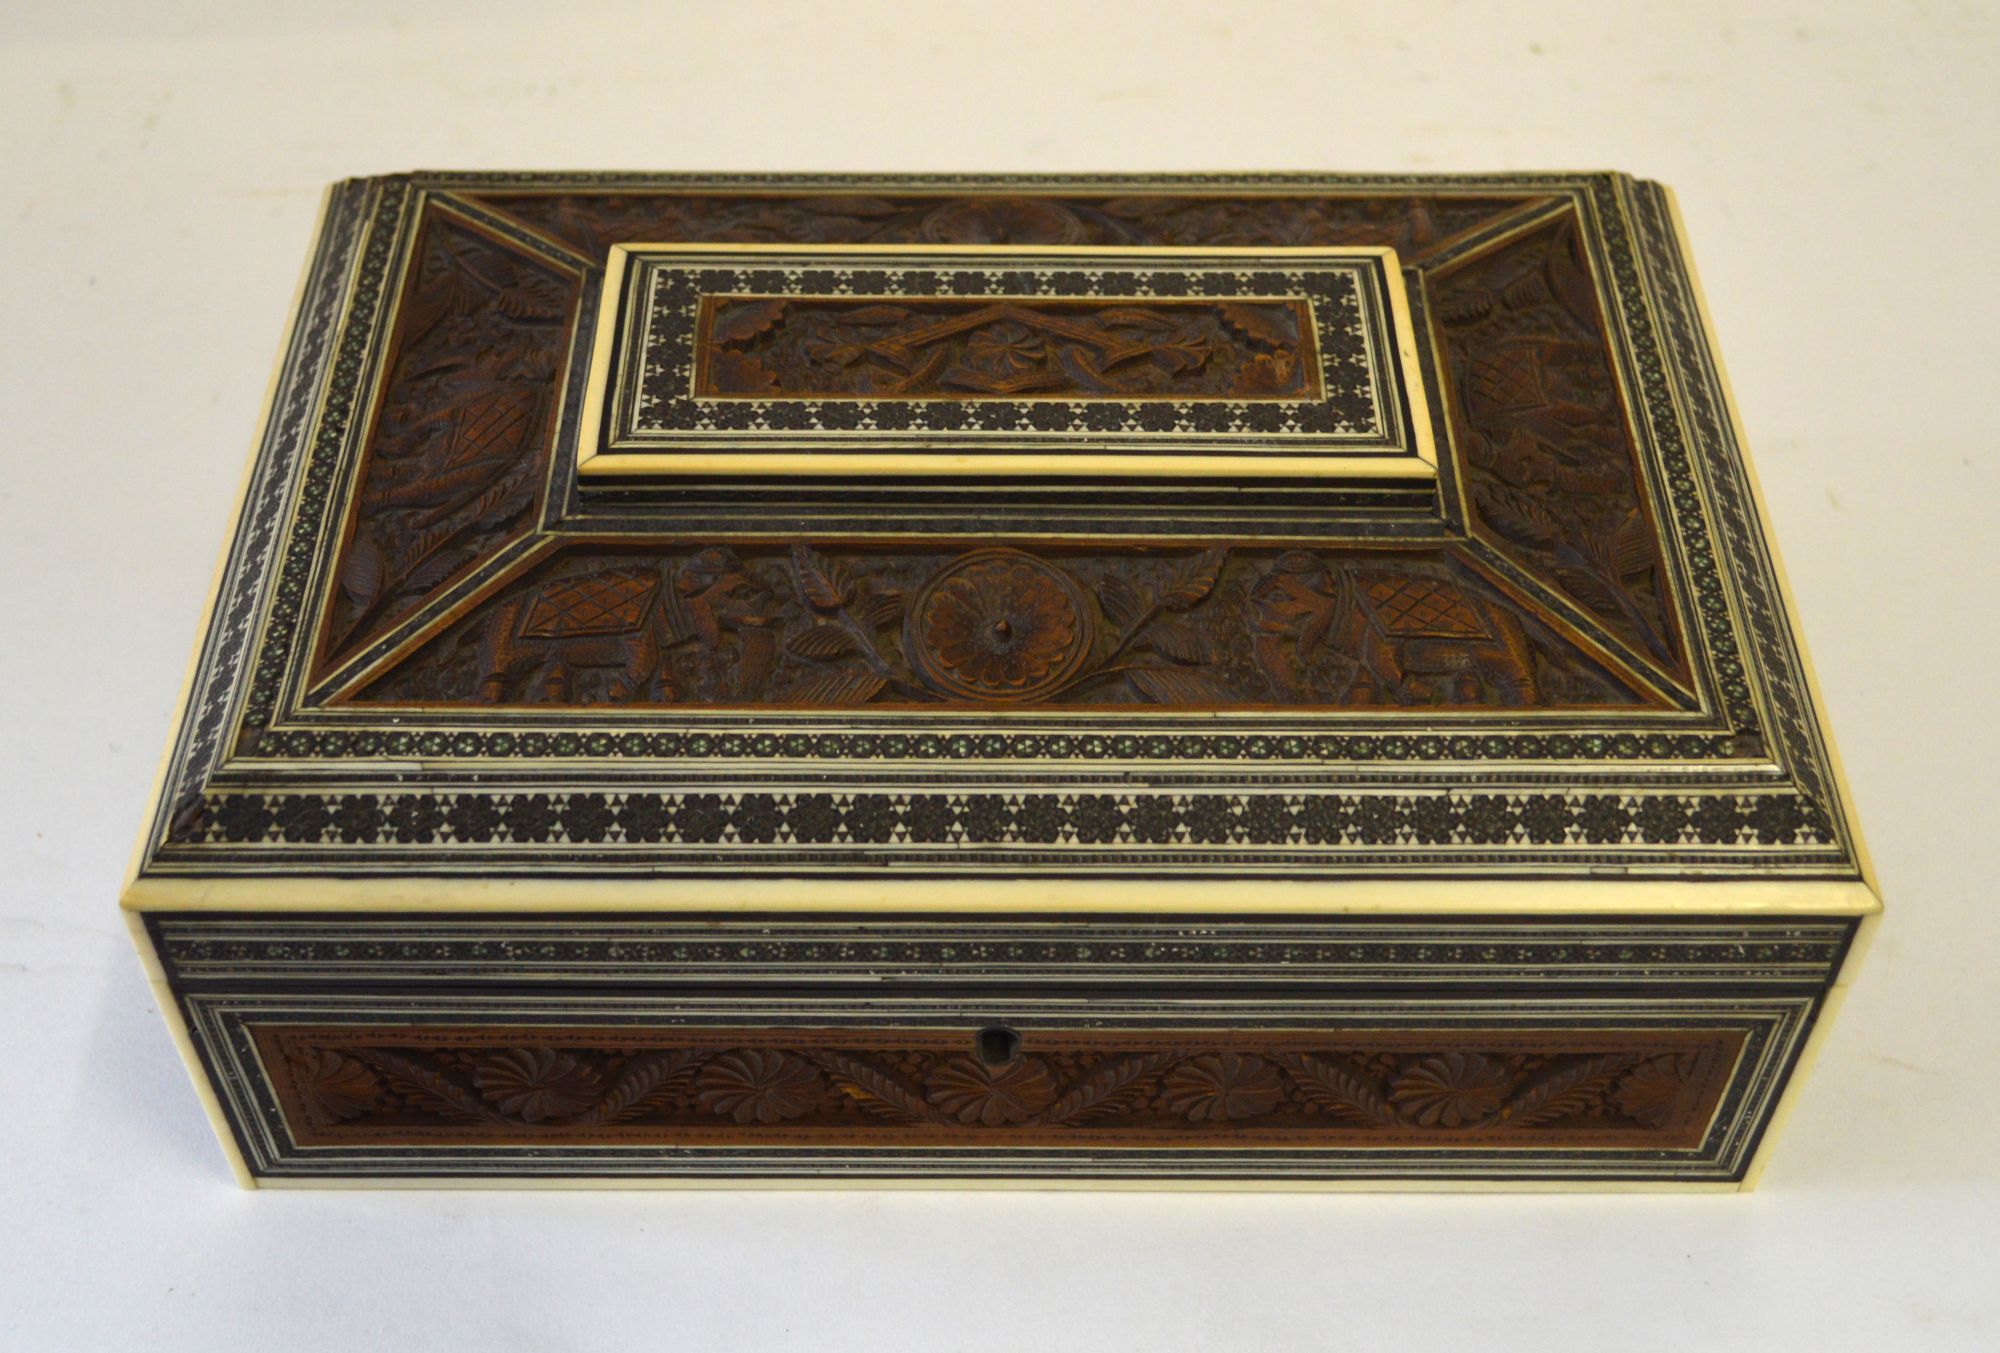 An early 20th century Anglo-Indian Vizagapatam sandalwood sewing/jewellery box,